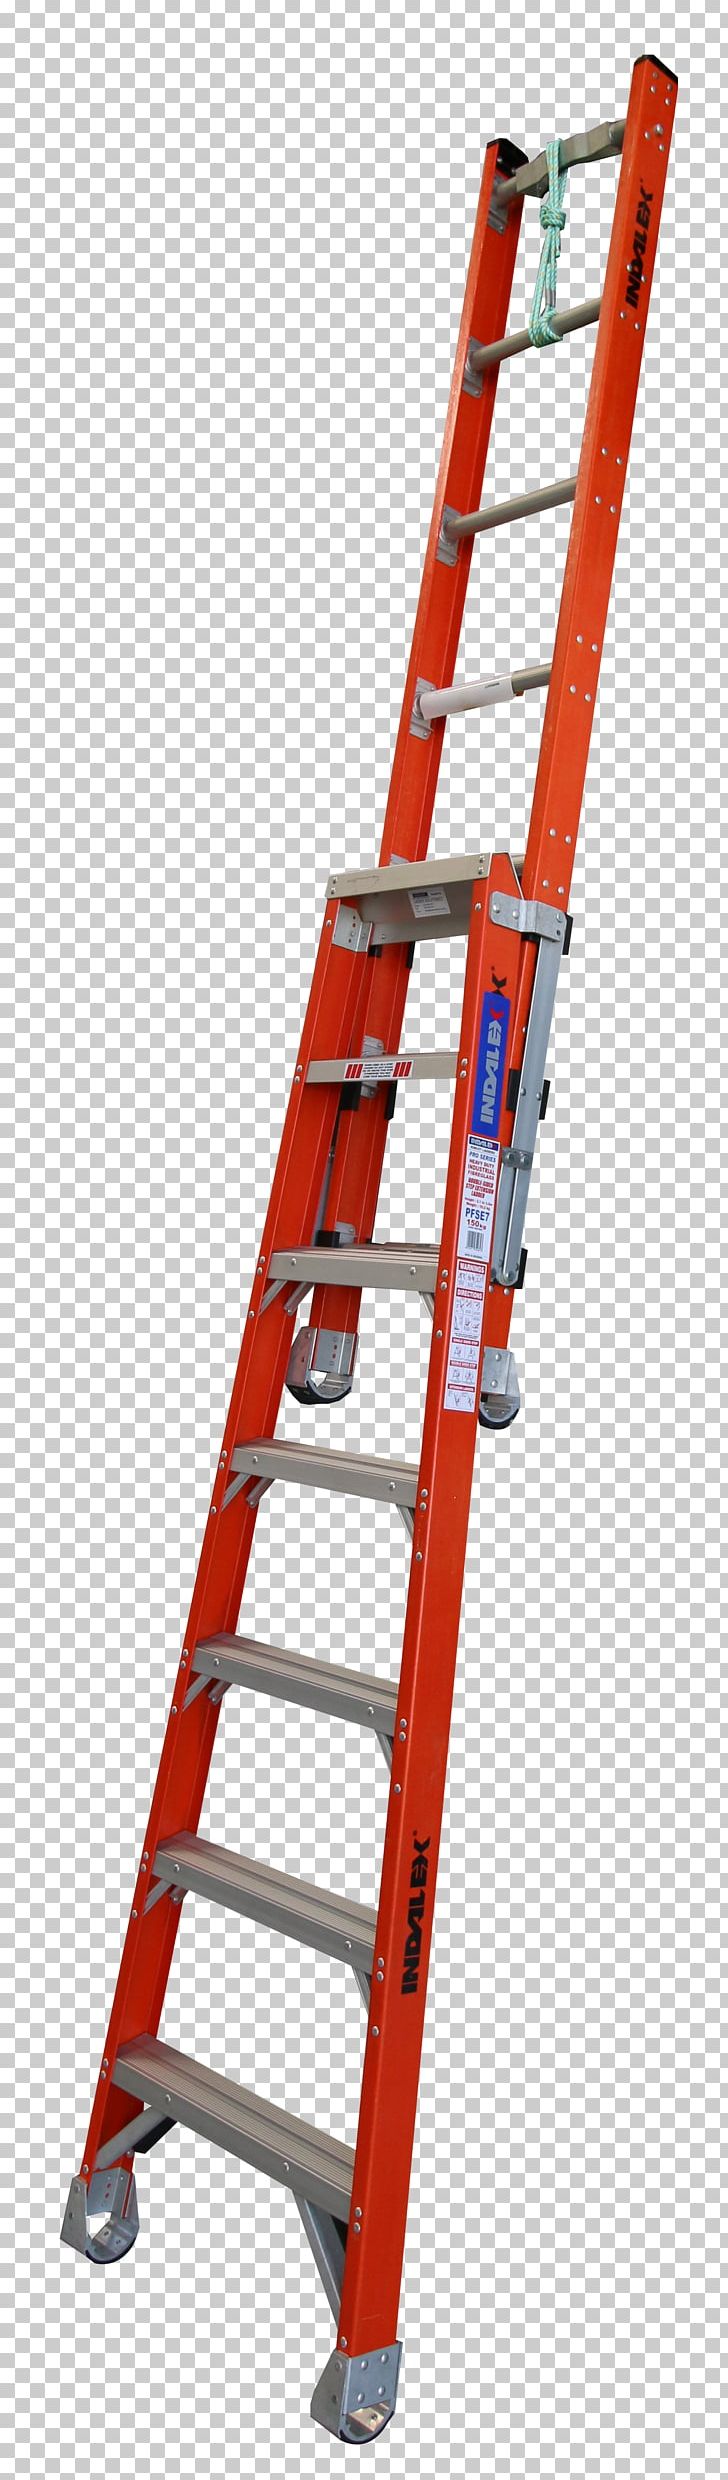 Attic Ladder Staircases Wood Fixed Ladder PNG, Clipart, Aframe, Altrex, Attic, Attic Ladder, Fiberglass Free PNG Download